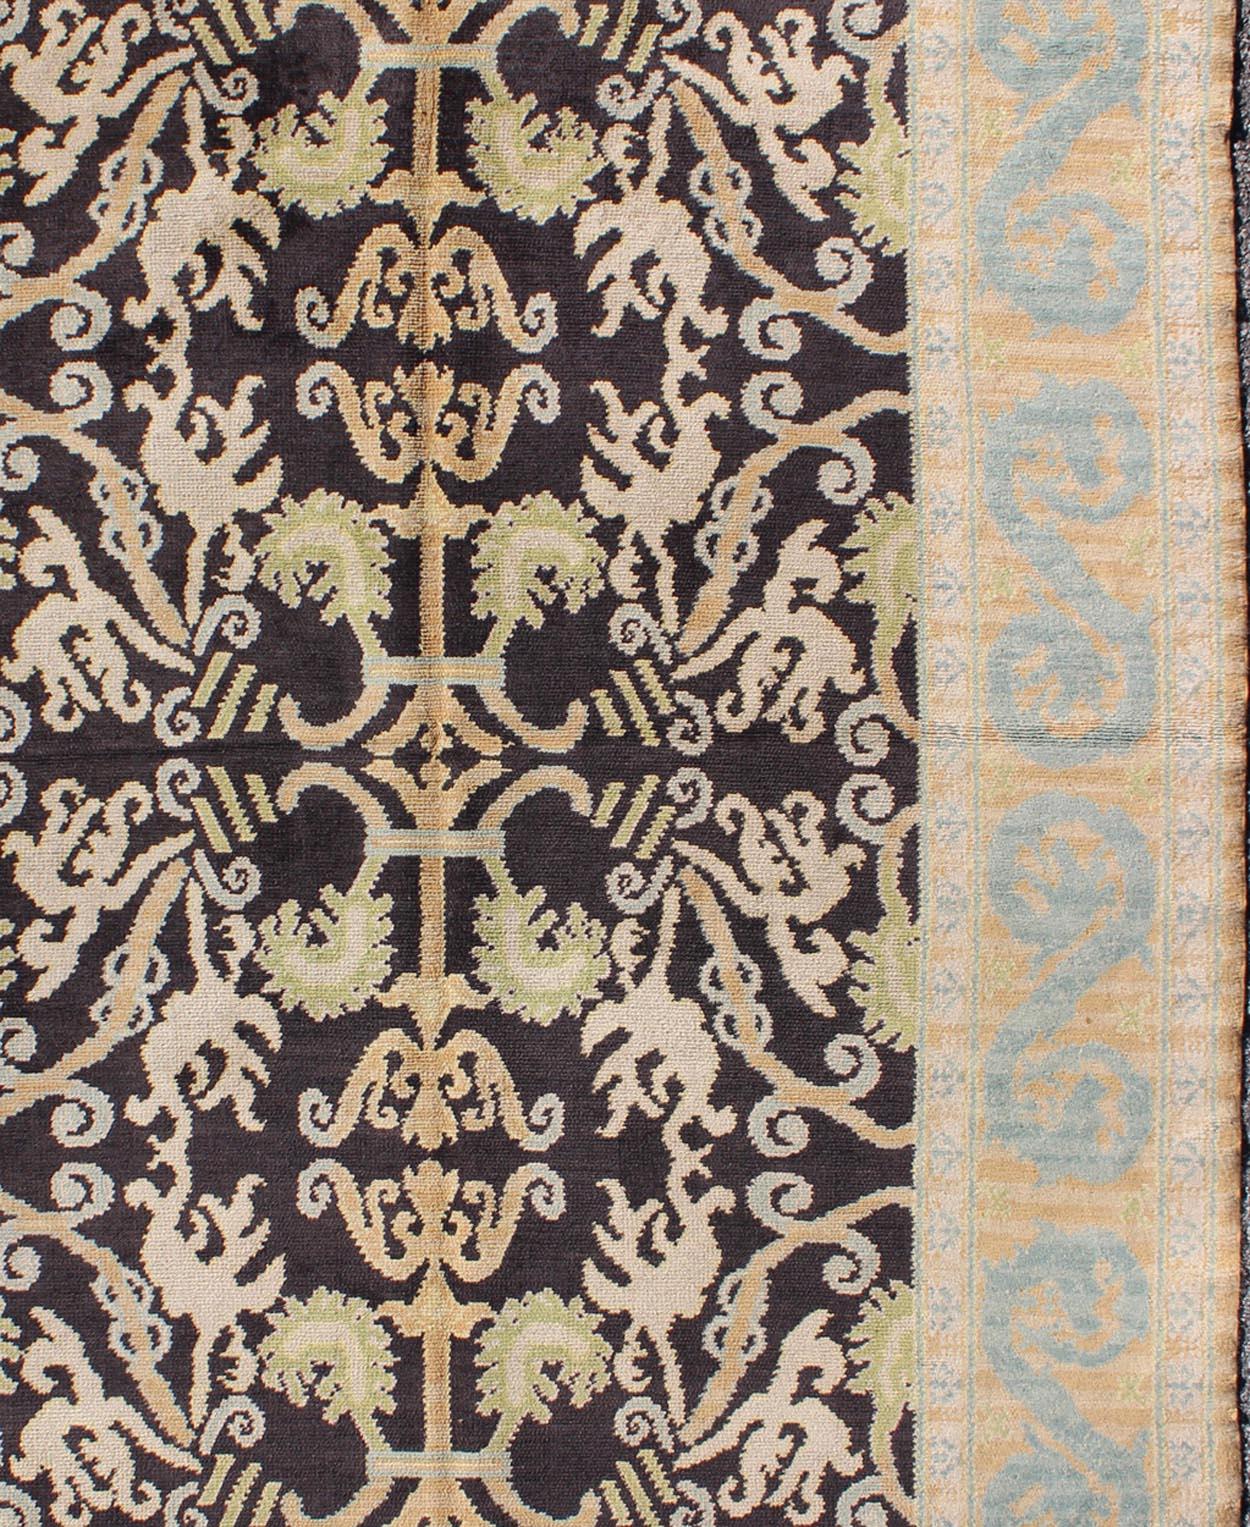 Antique Spanish rug with all-over Botanicals in black, light blue, light green and taupe, rug F-1203, country of origin / type: Spain / Spanish Colonial, circa 1920 
This elegant antique Spanish carpet is the proud heir to a long tradition of